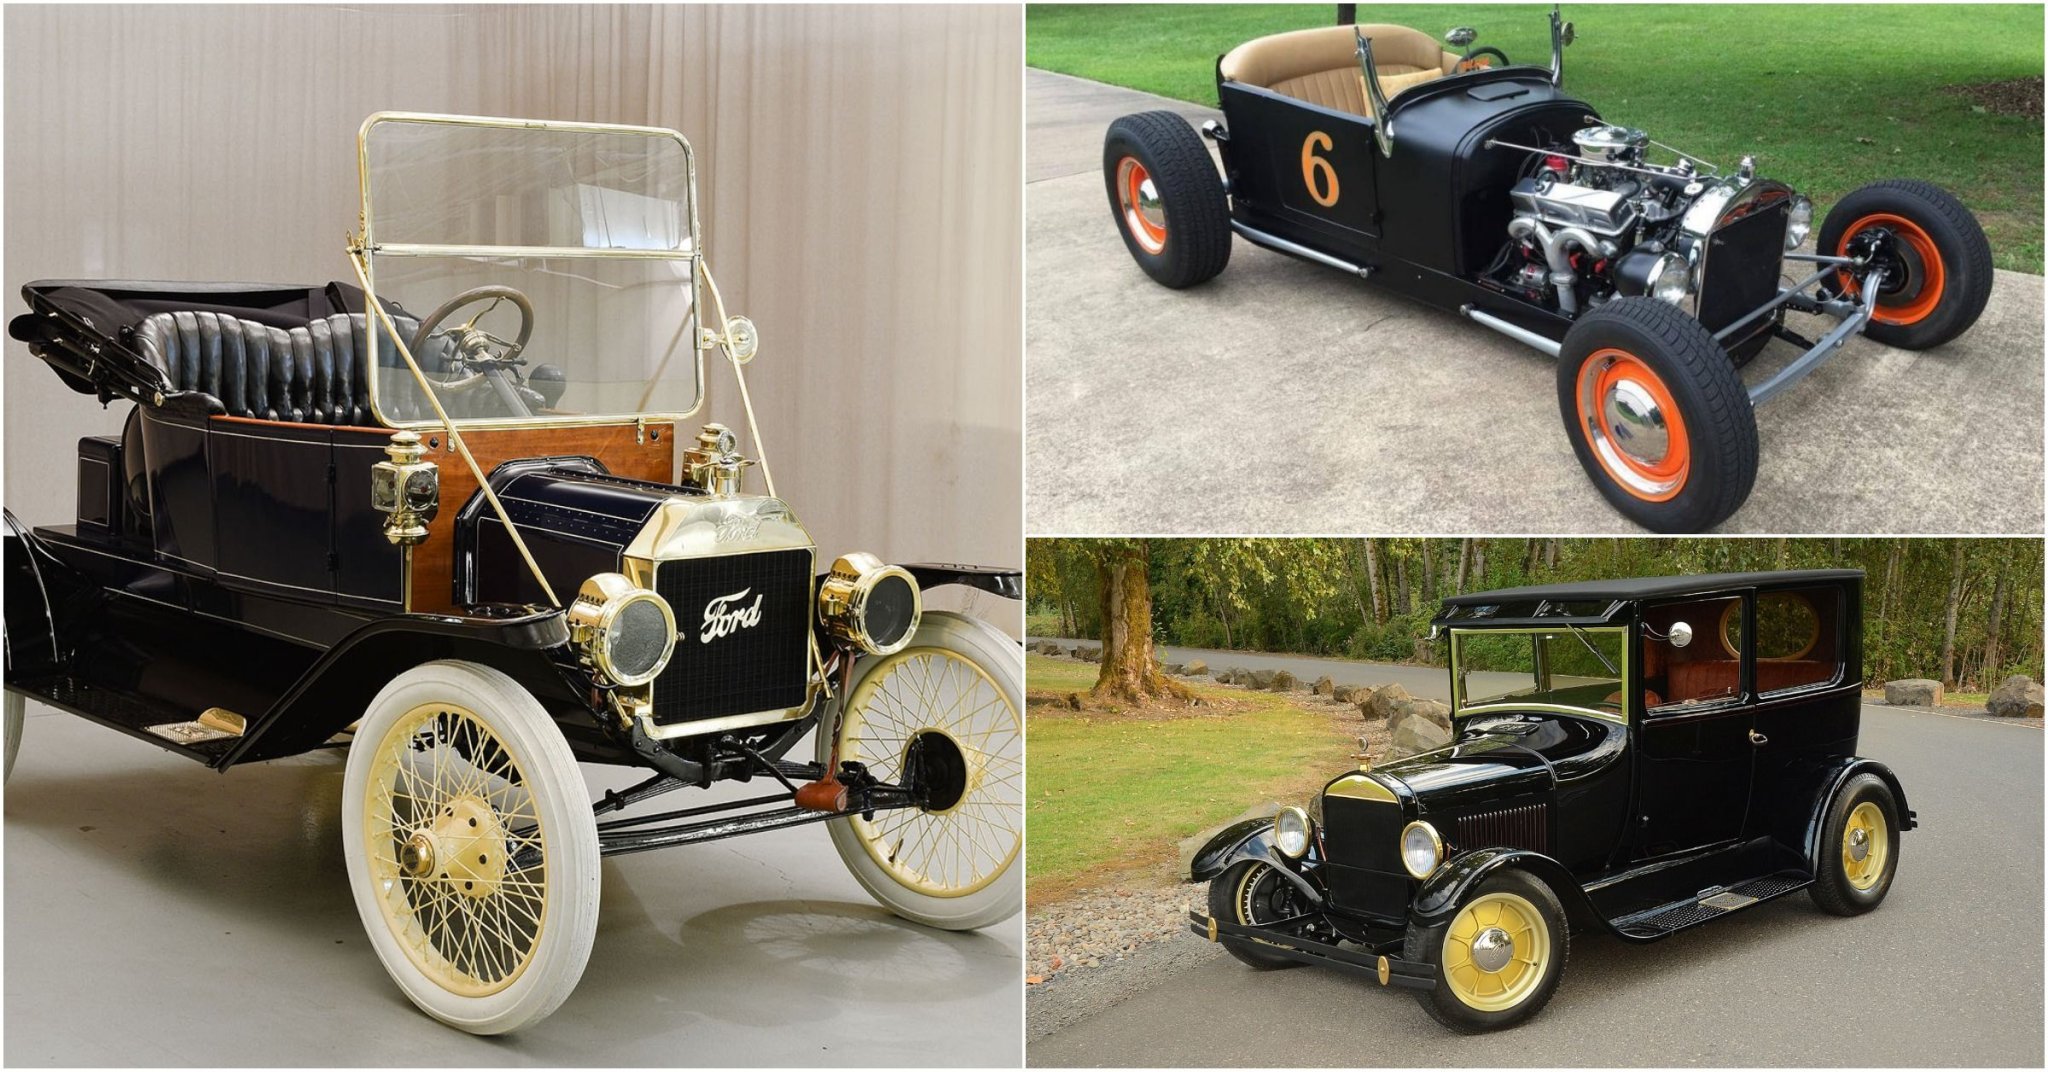 15 Photos Of The Ford Model T That Make You Want One